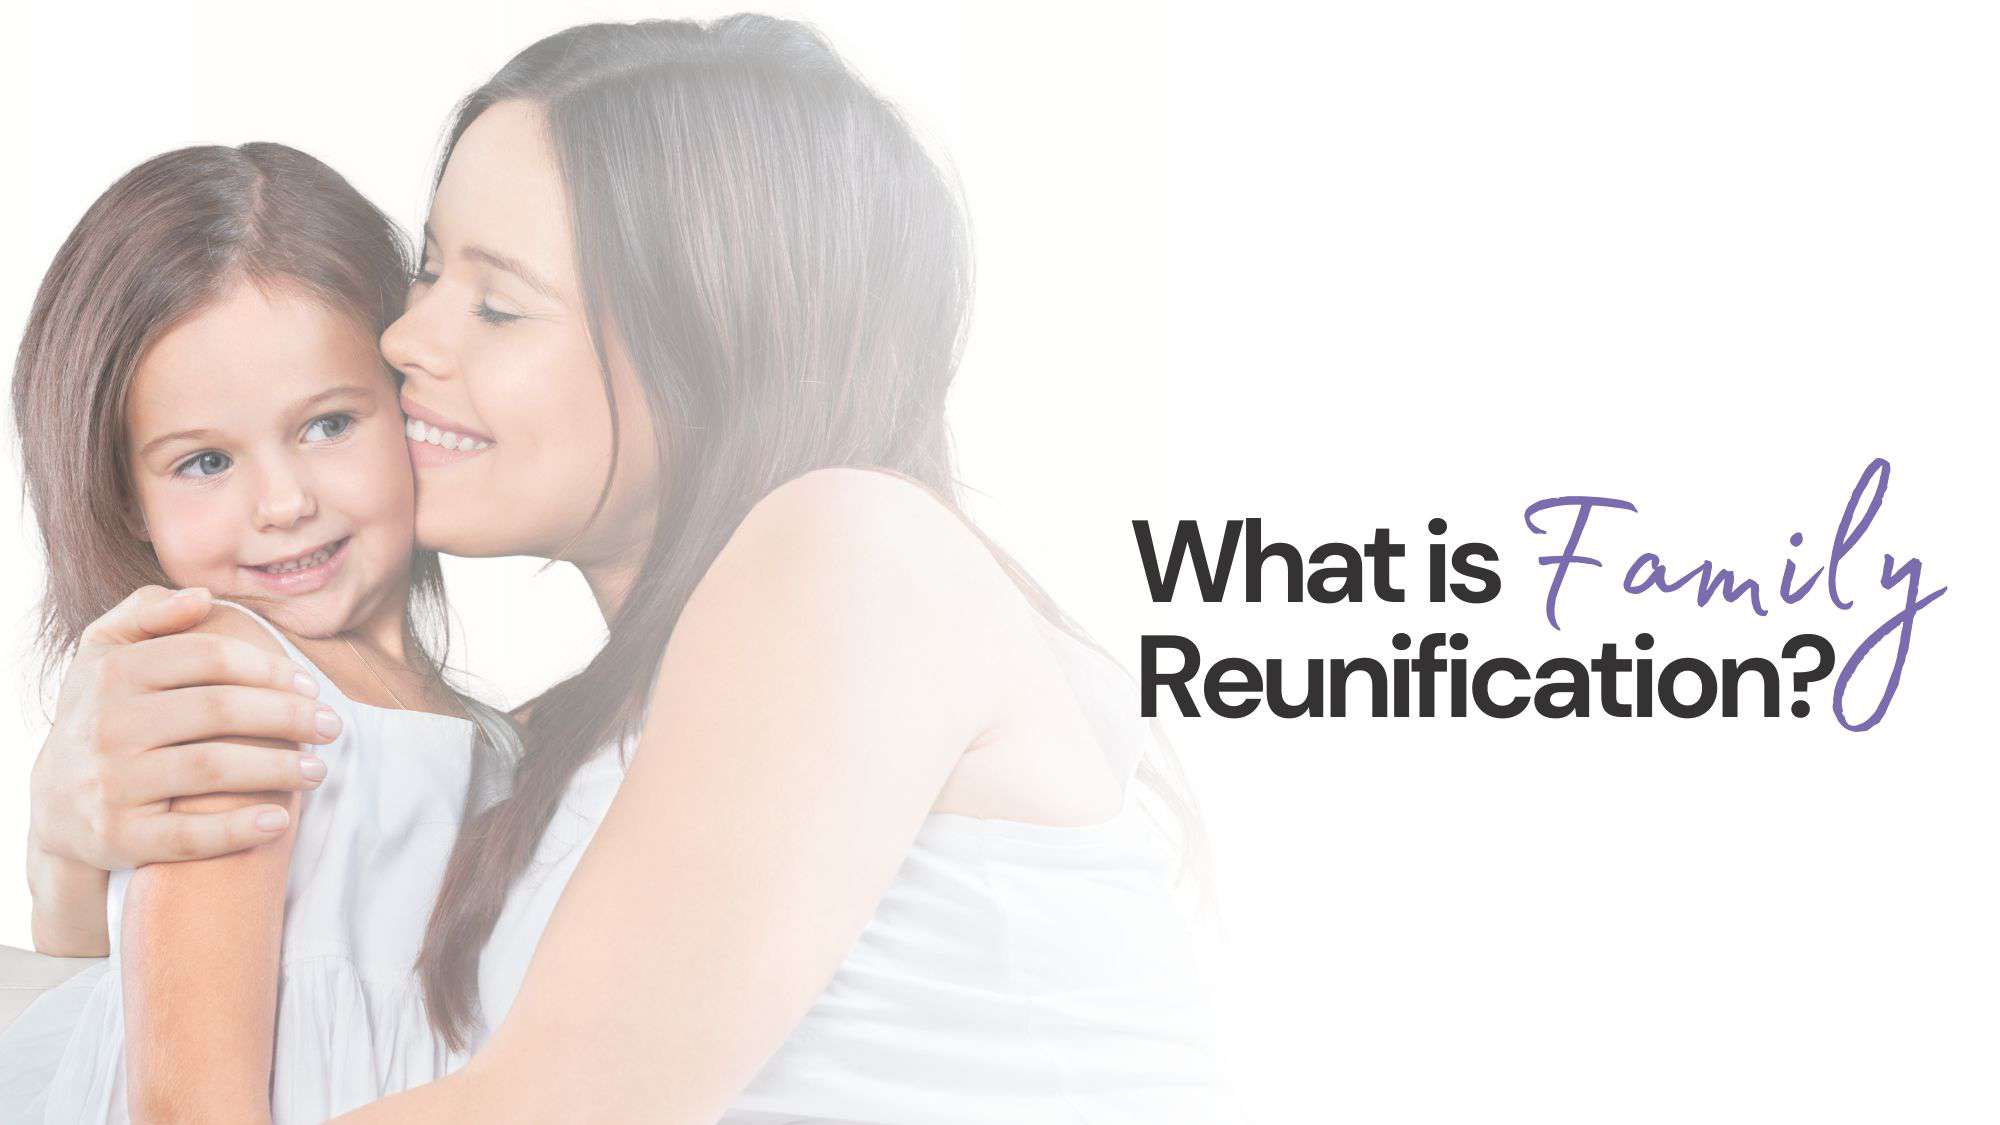 What is Family Reunification